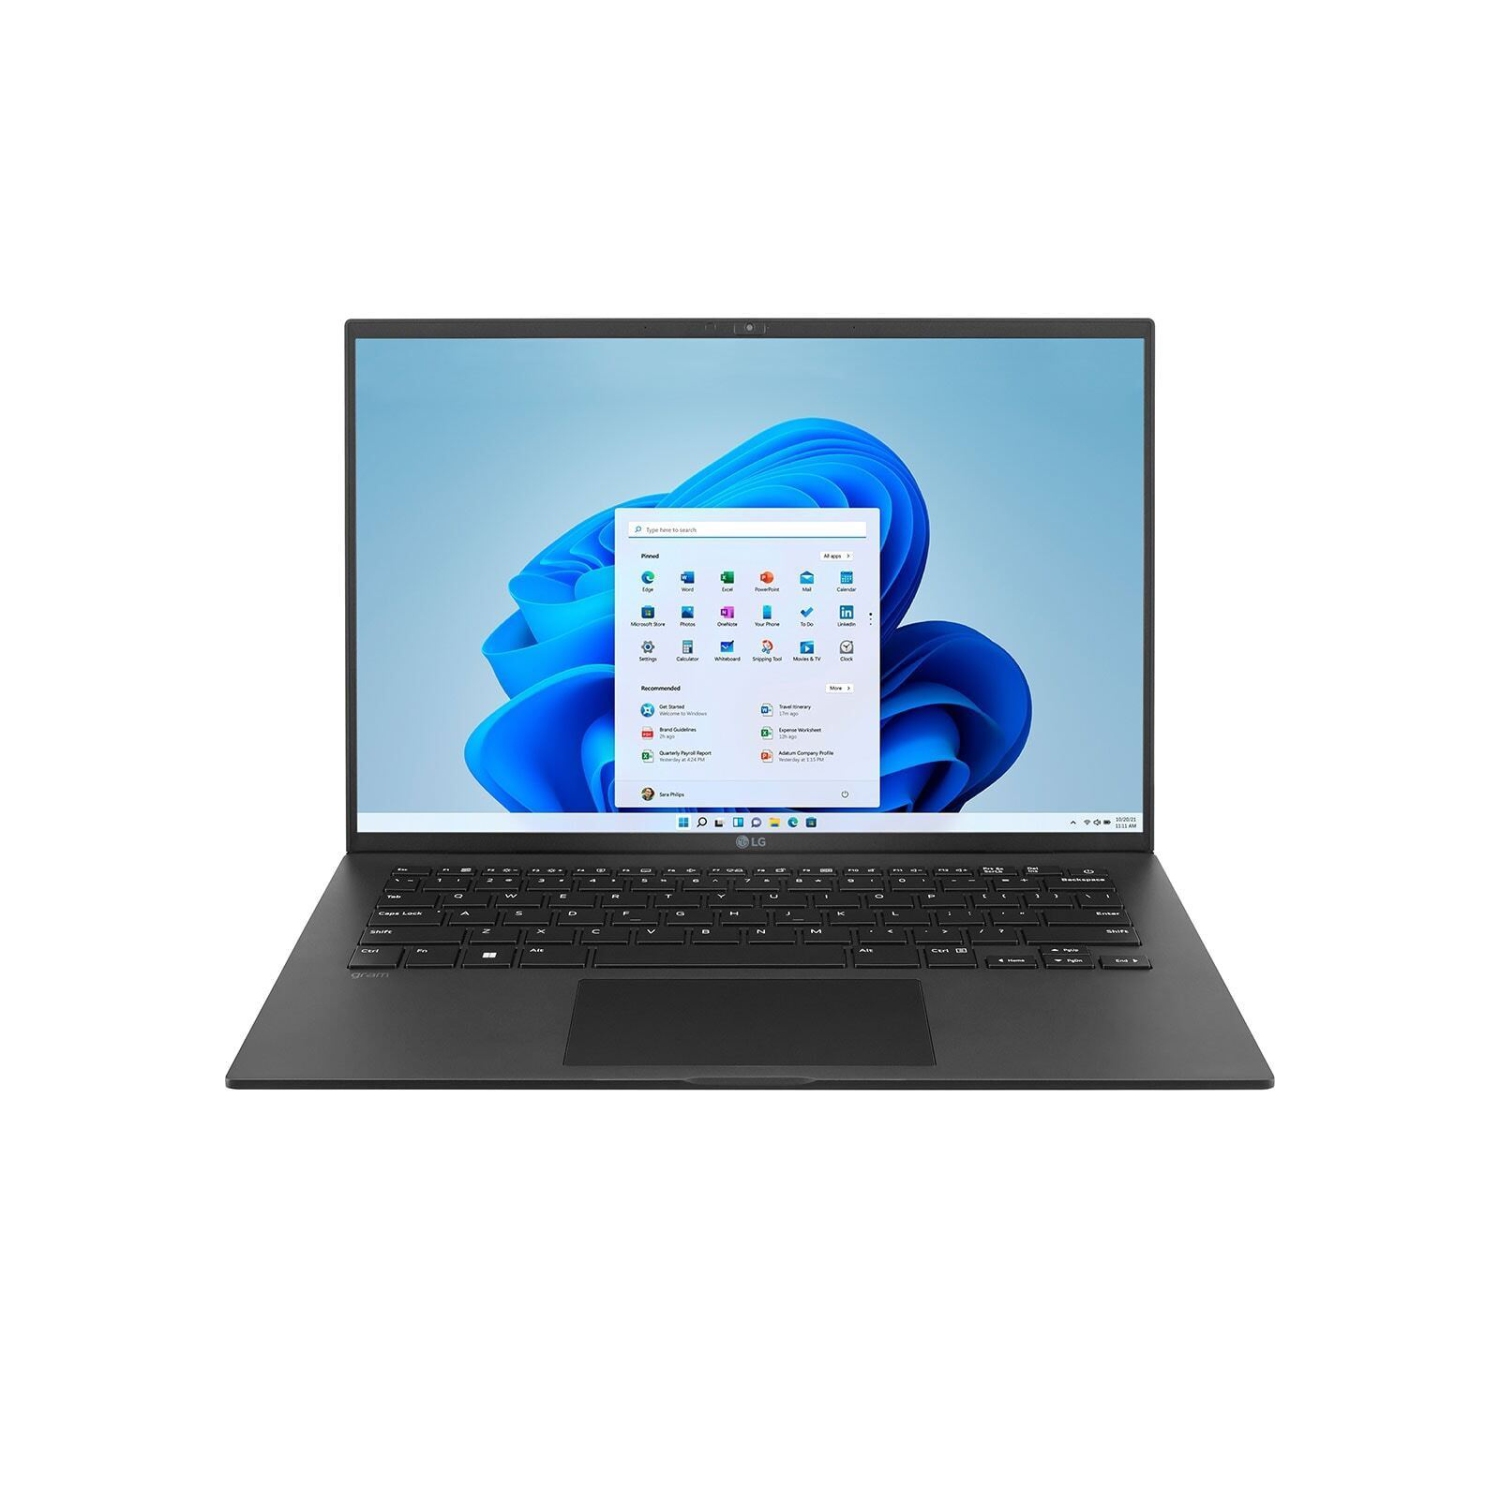 Refurbished (Excellent) LG Gram 14Z90Q - Thin and Lightweight Laptop 14" FHD+ ( Intel Iris Xe Graphics / Intel Core i7-1260P / 16GB / 512GB nVME SSD / Windows 11) 2 Years warranty